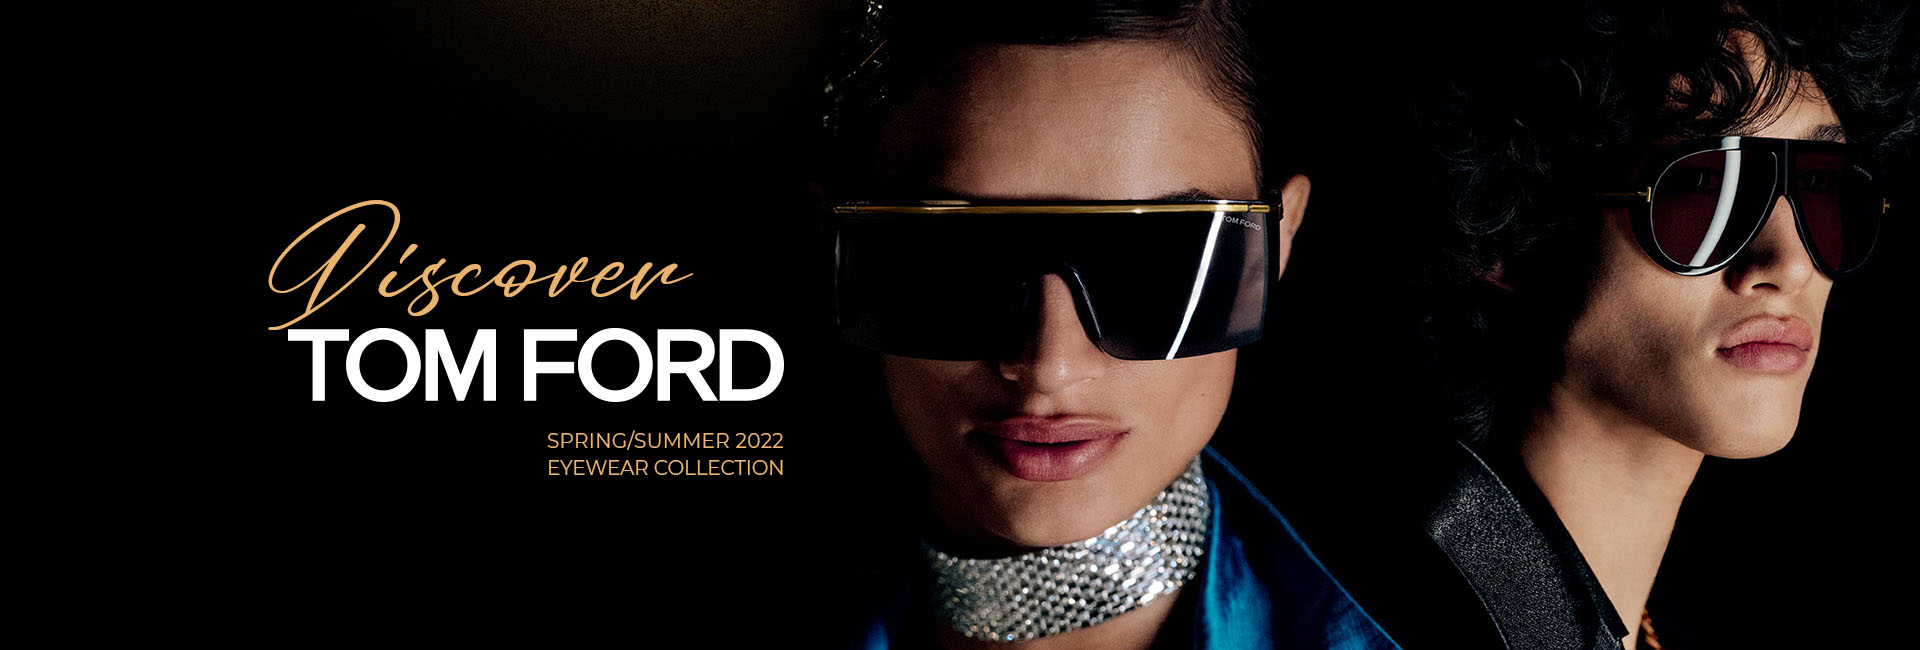 Discover Tom Ford - Spring/Summer 2022 Eyewear Collection